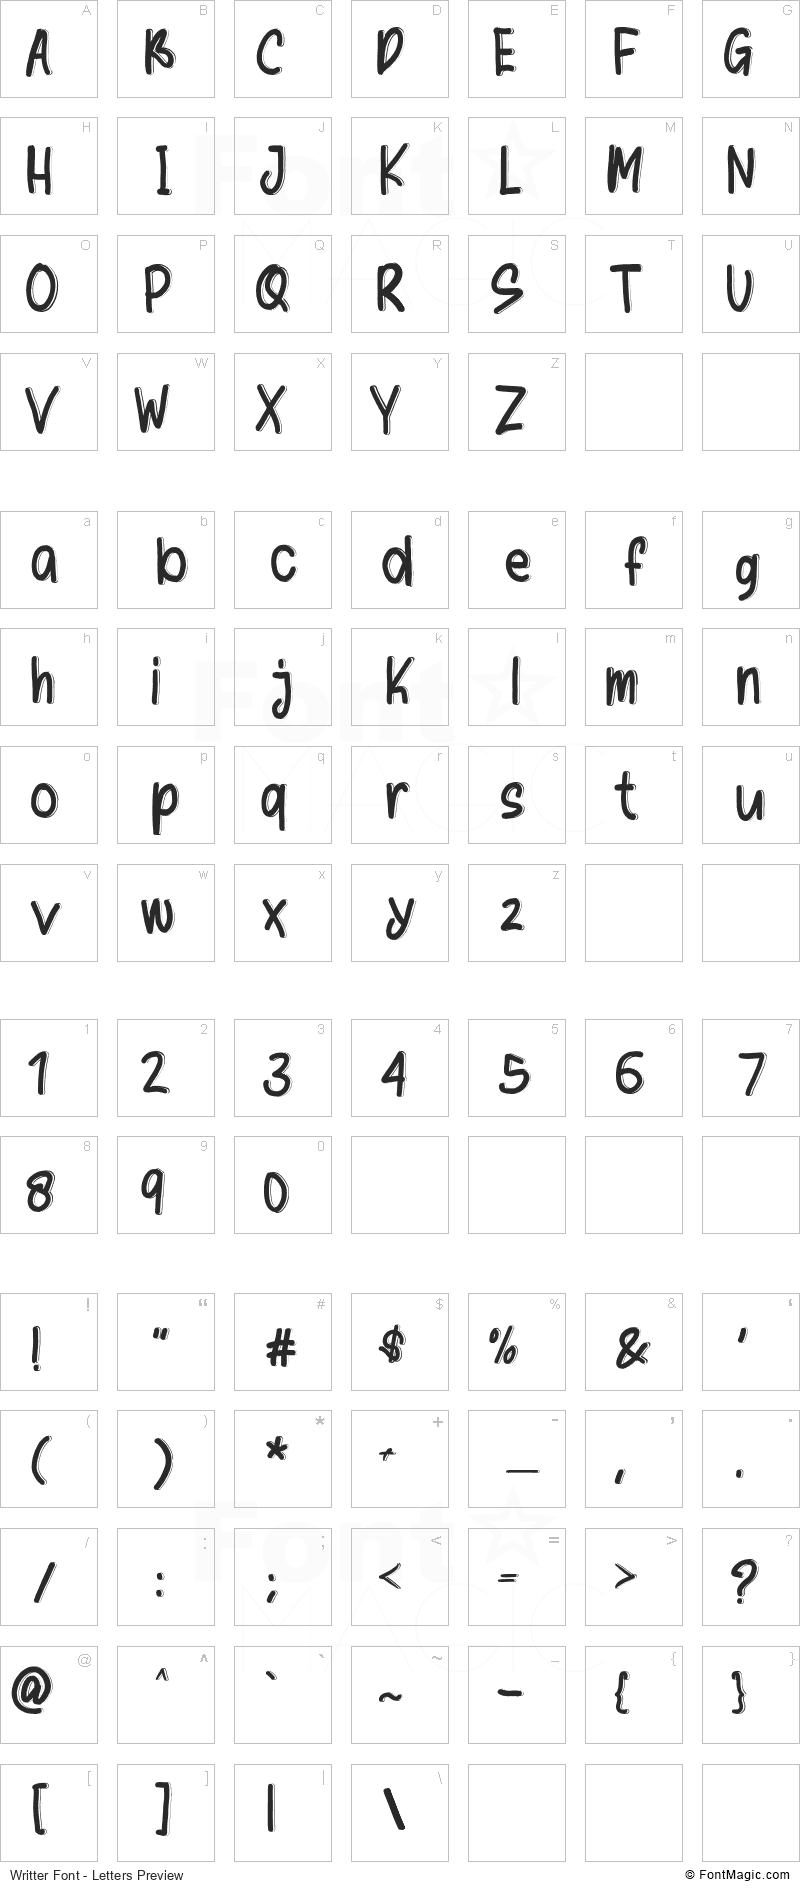 Writter Font - All Latters Preview Chart